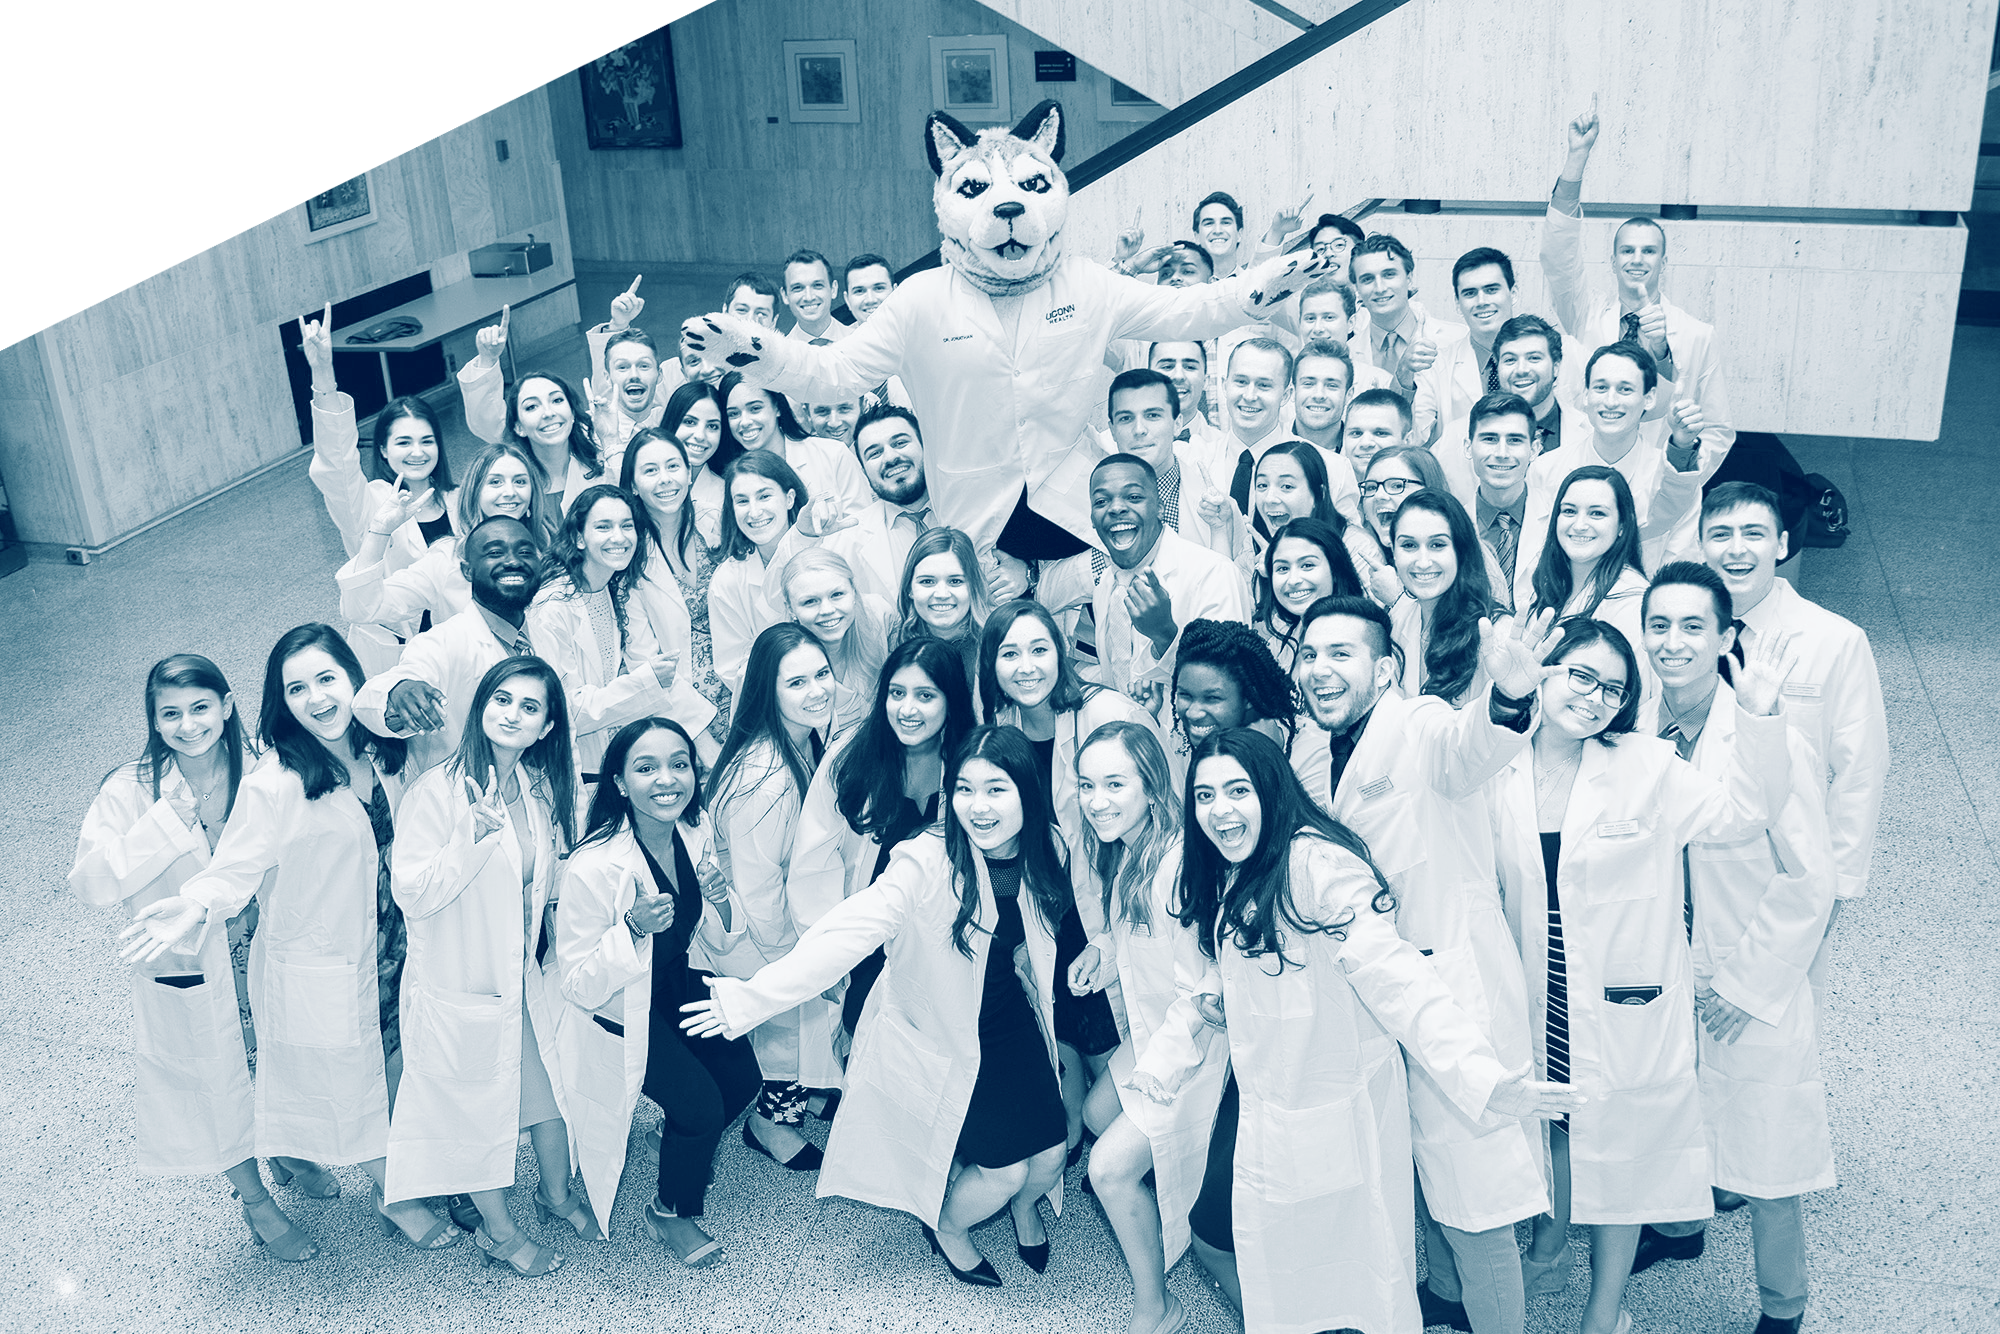 Fifty-four students in the UConn School of Dental Medicine Class of 2023 (pictured) received their white coats on Aug. 23, along with UConn School of Medicine's 110 new medical students.